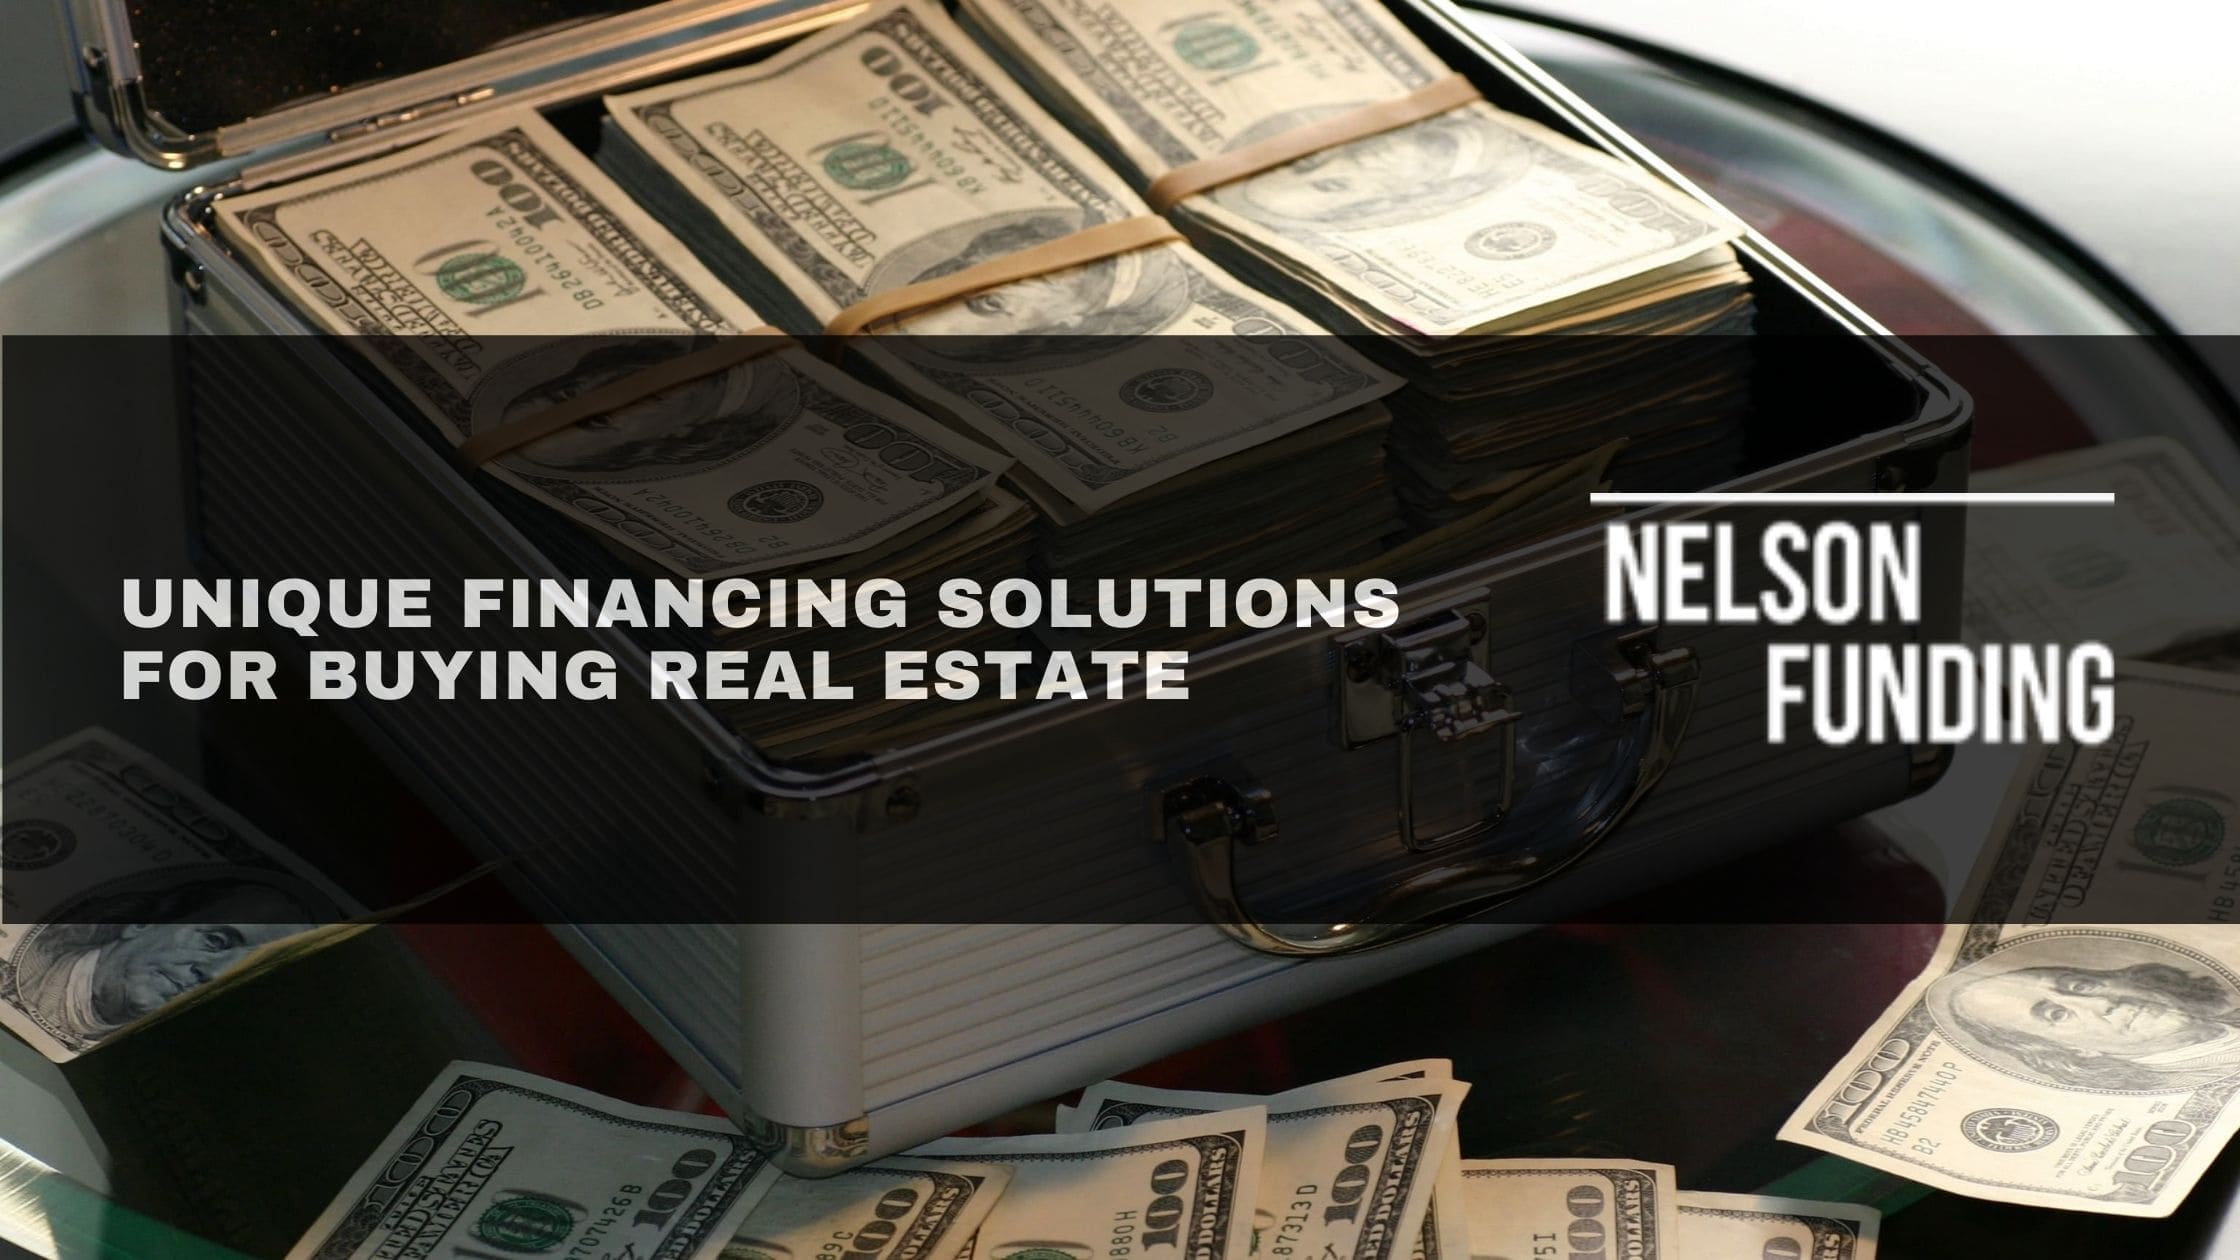 Financial Solutions